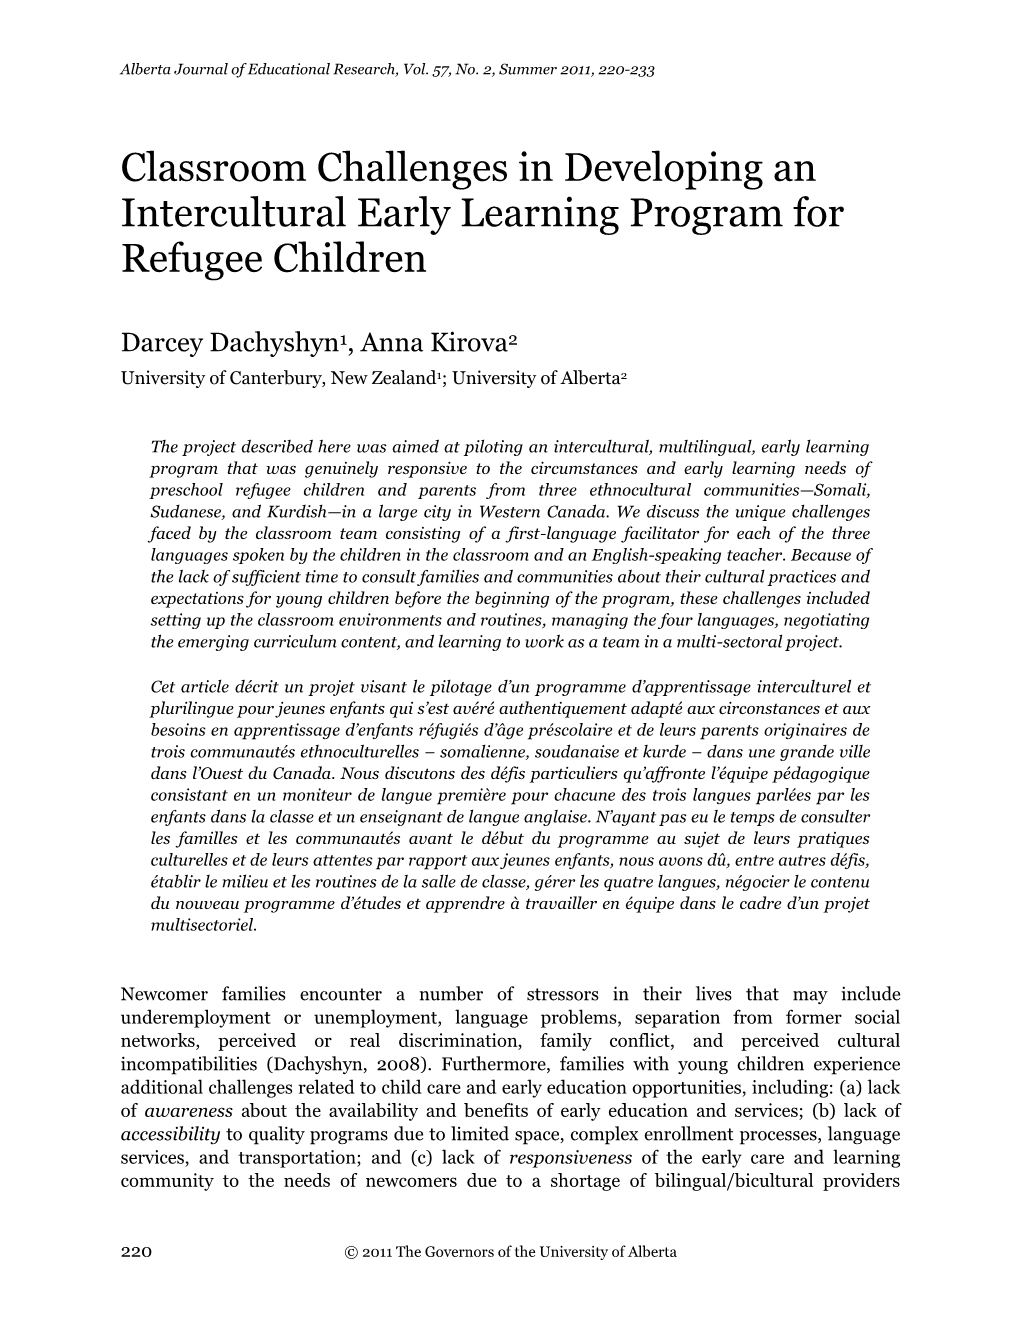 Classroom Challenges in Developing an Intercultural Early Learning Program for Refugee Children